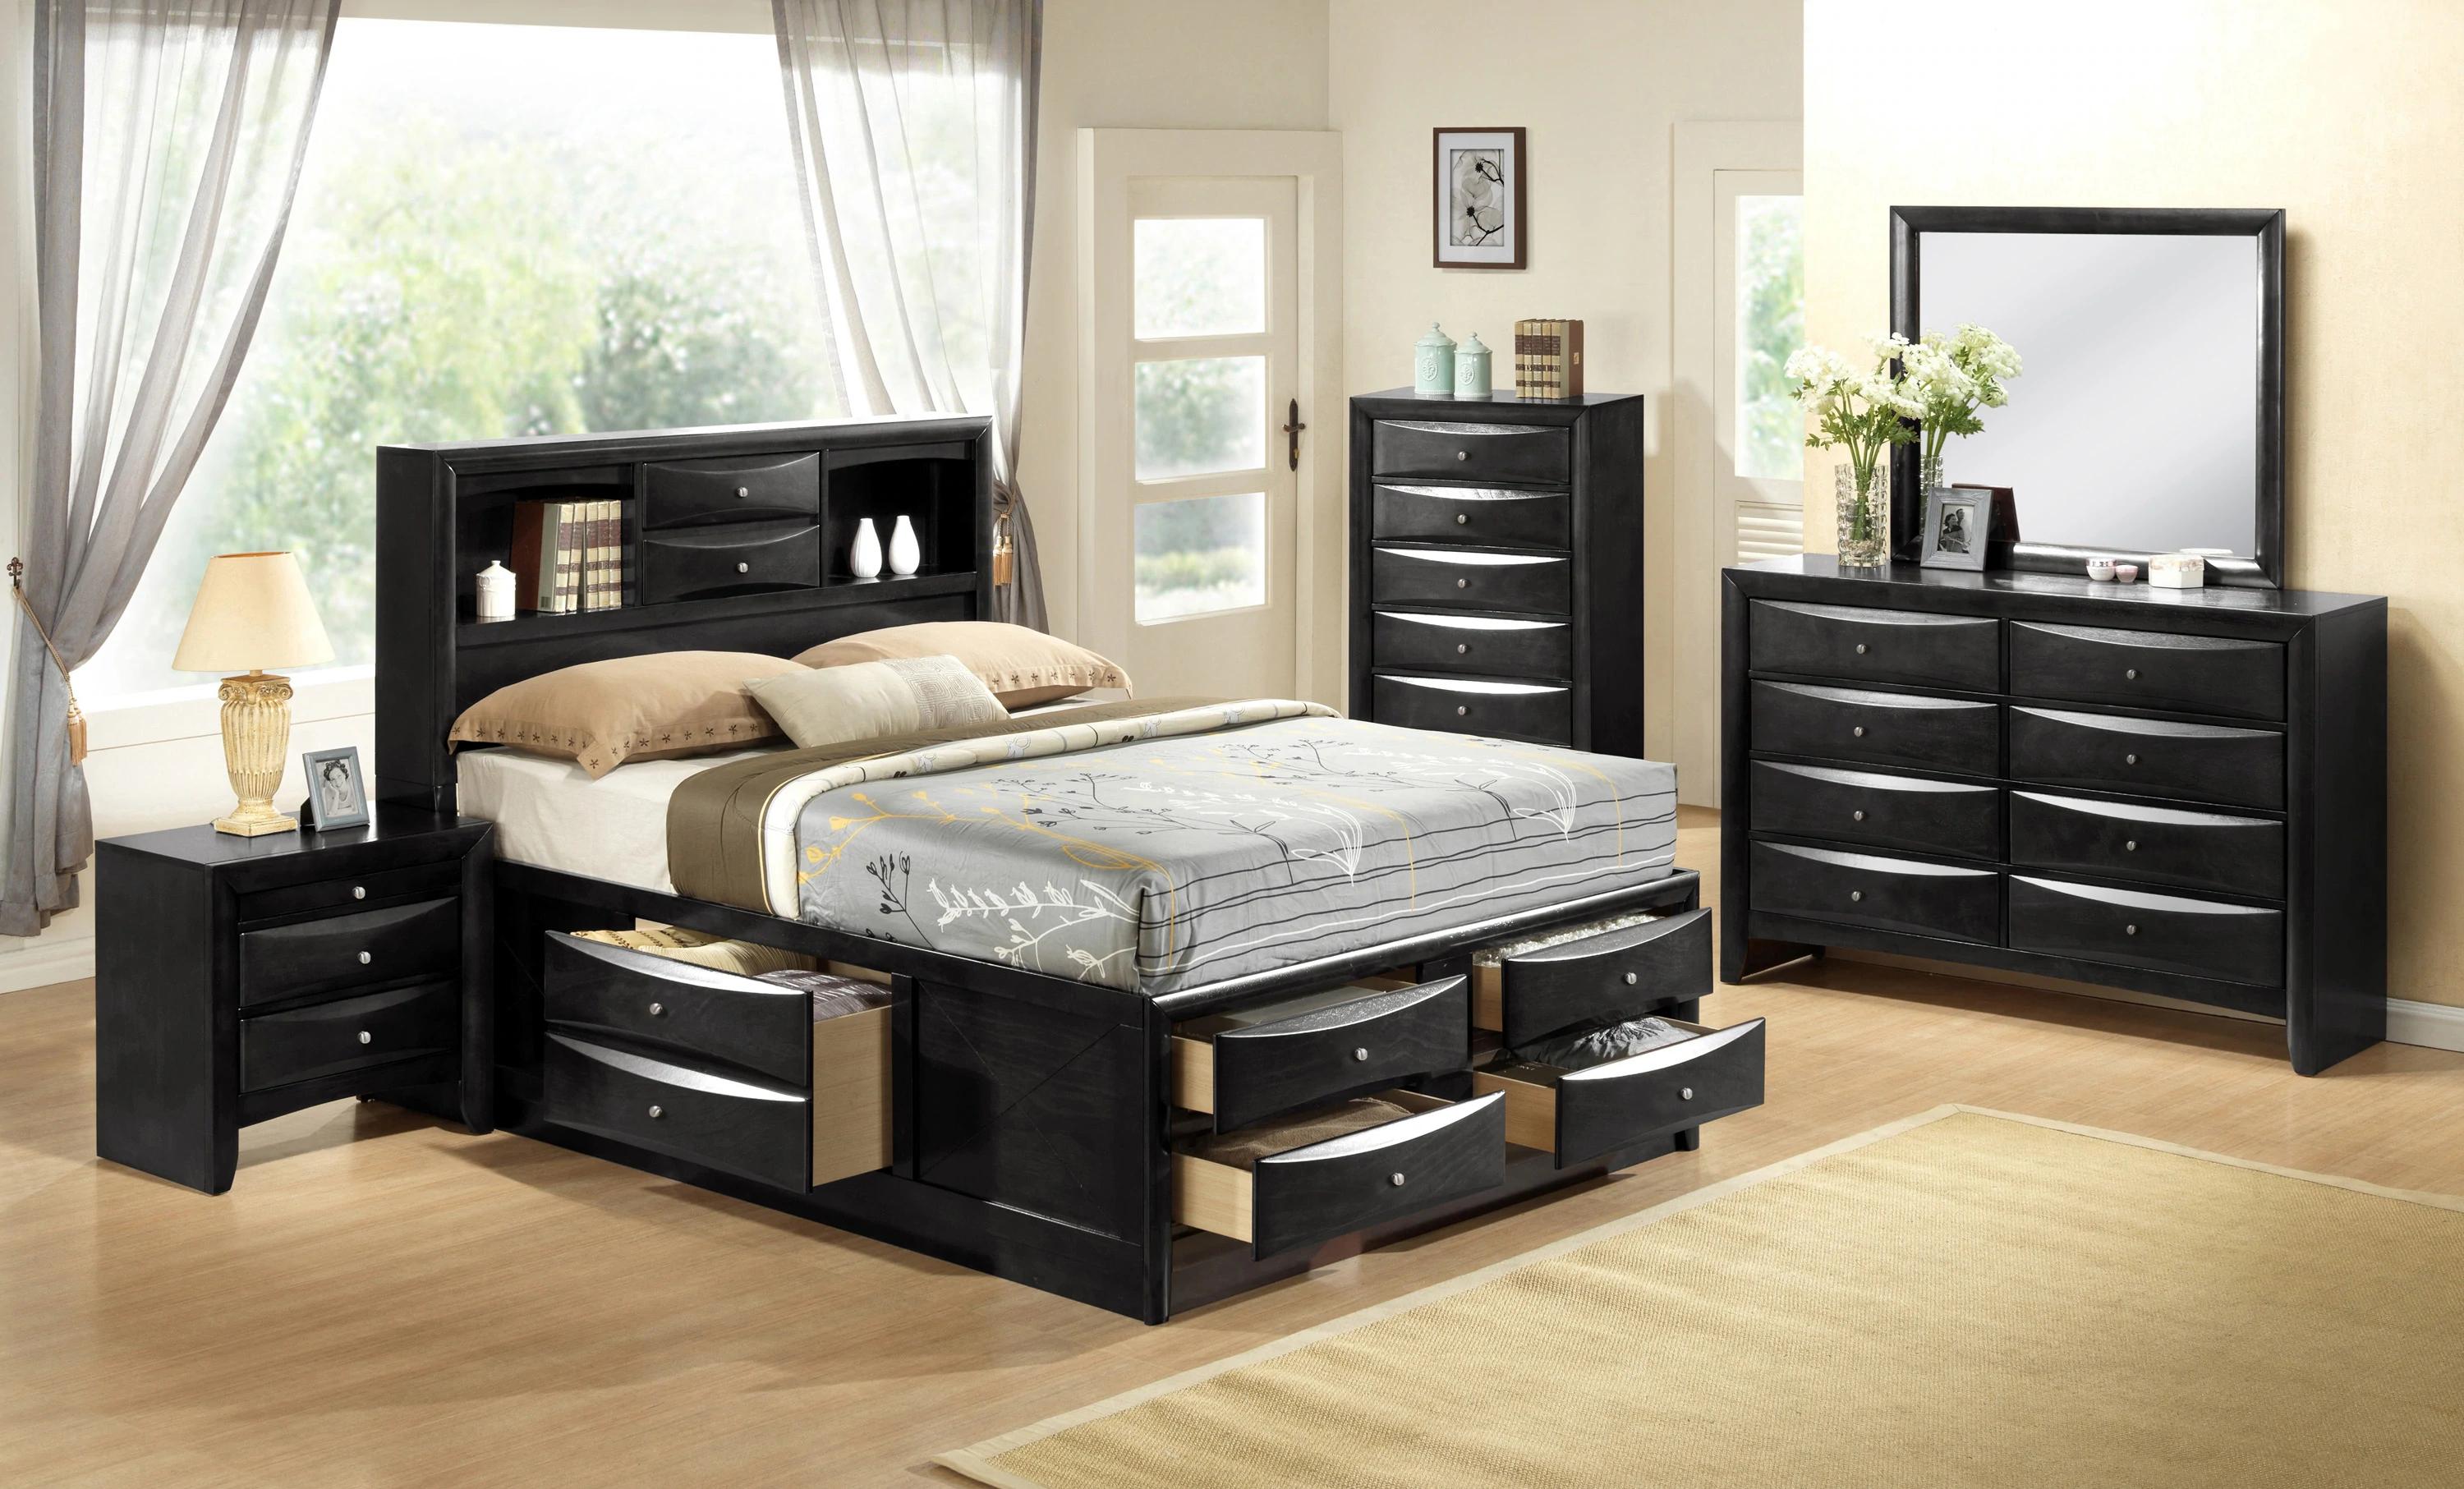 Contemporary, Transitional Storage Bedroom Set Emily B4285-Q-Bed-5pcs in Black 